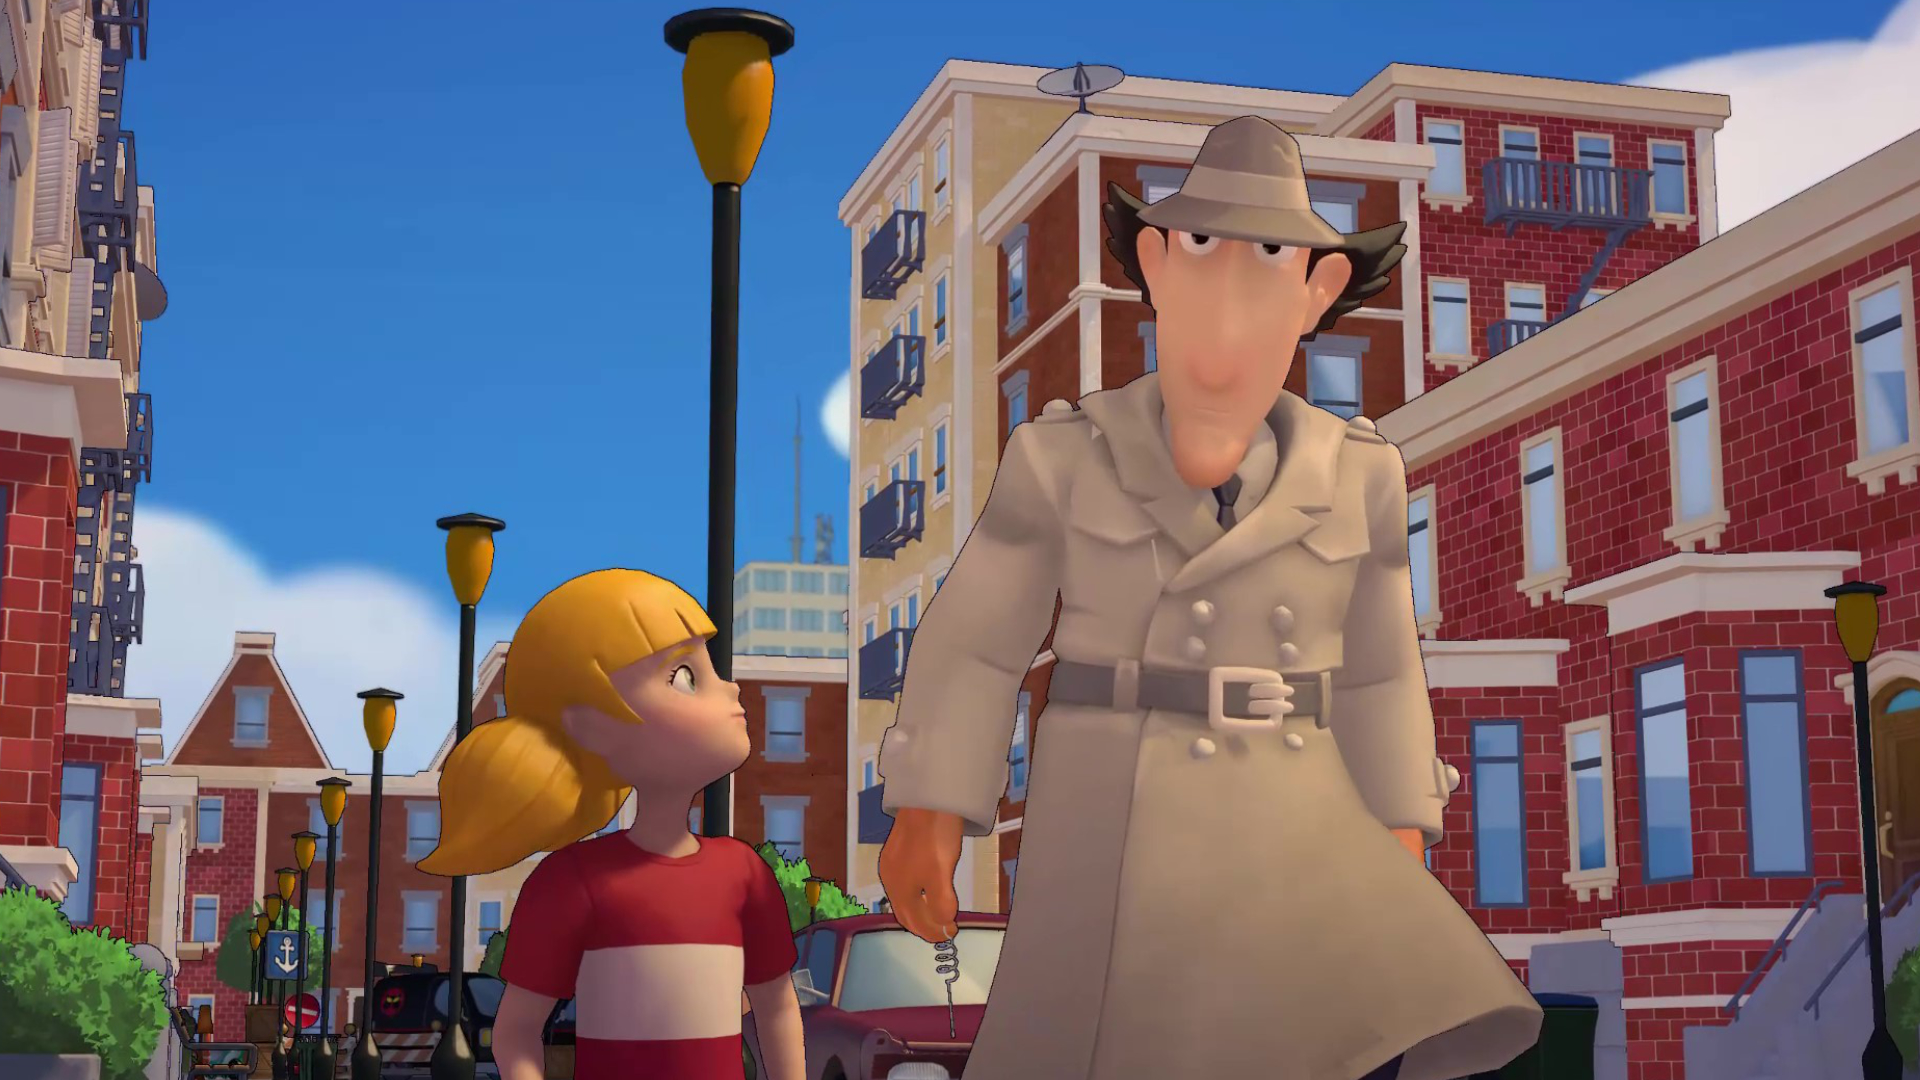 Inspector Gadget - Mad Time Party Is a Surprisingly Pretty Game